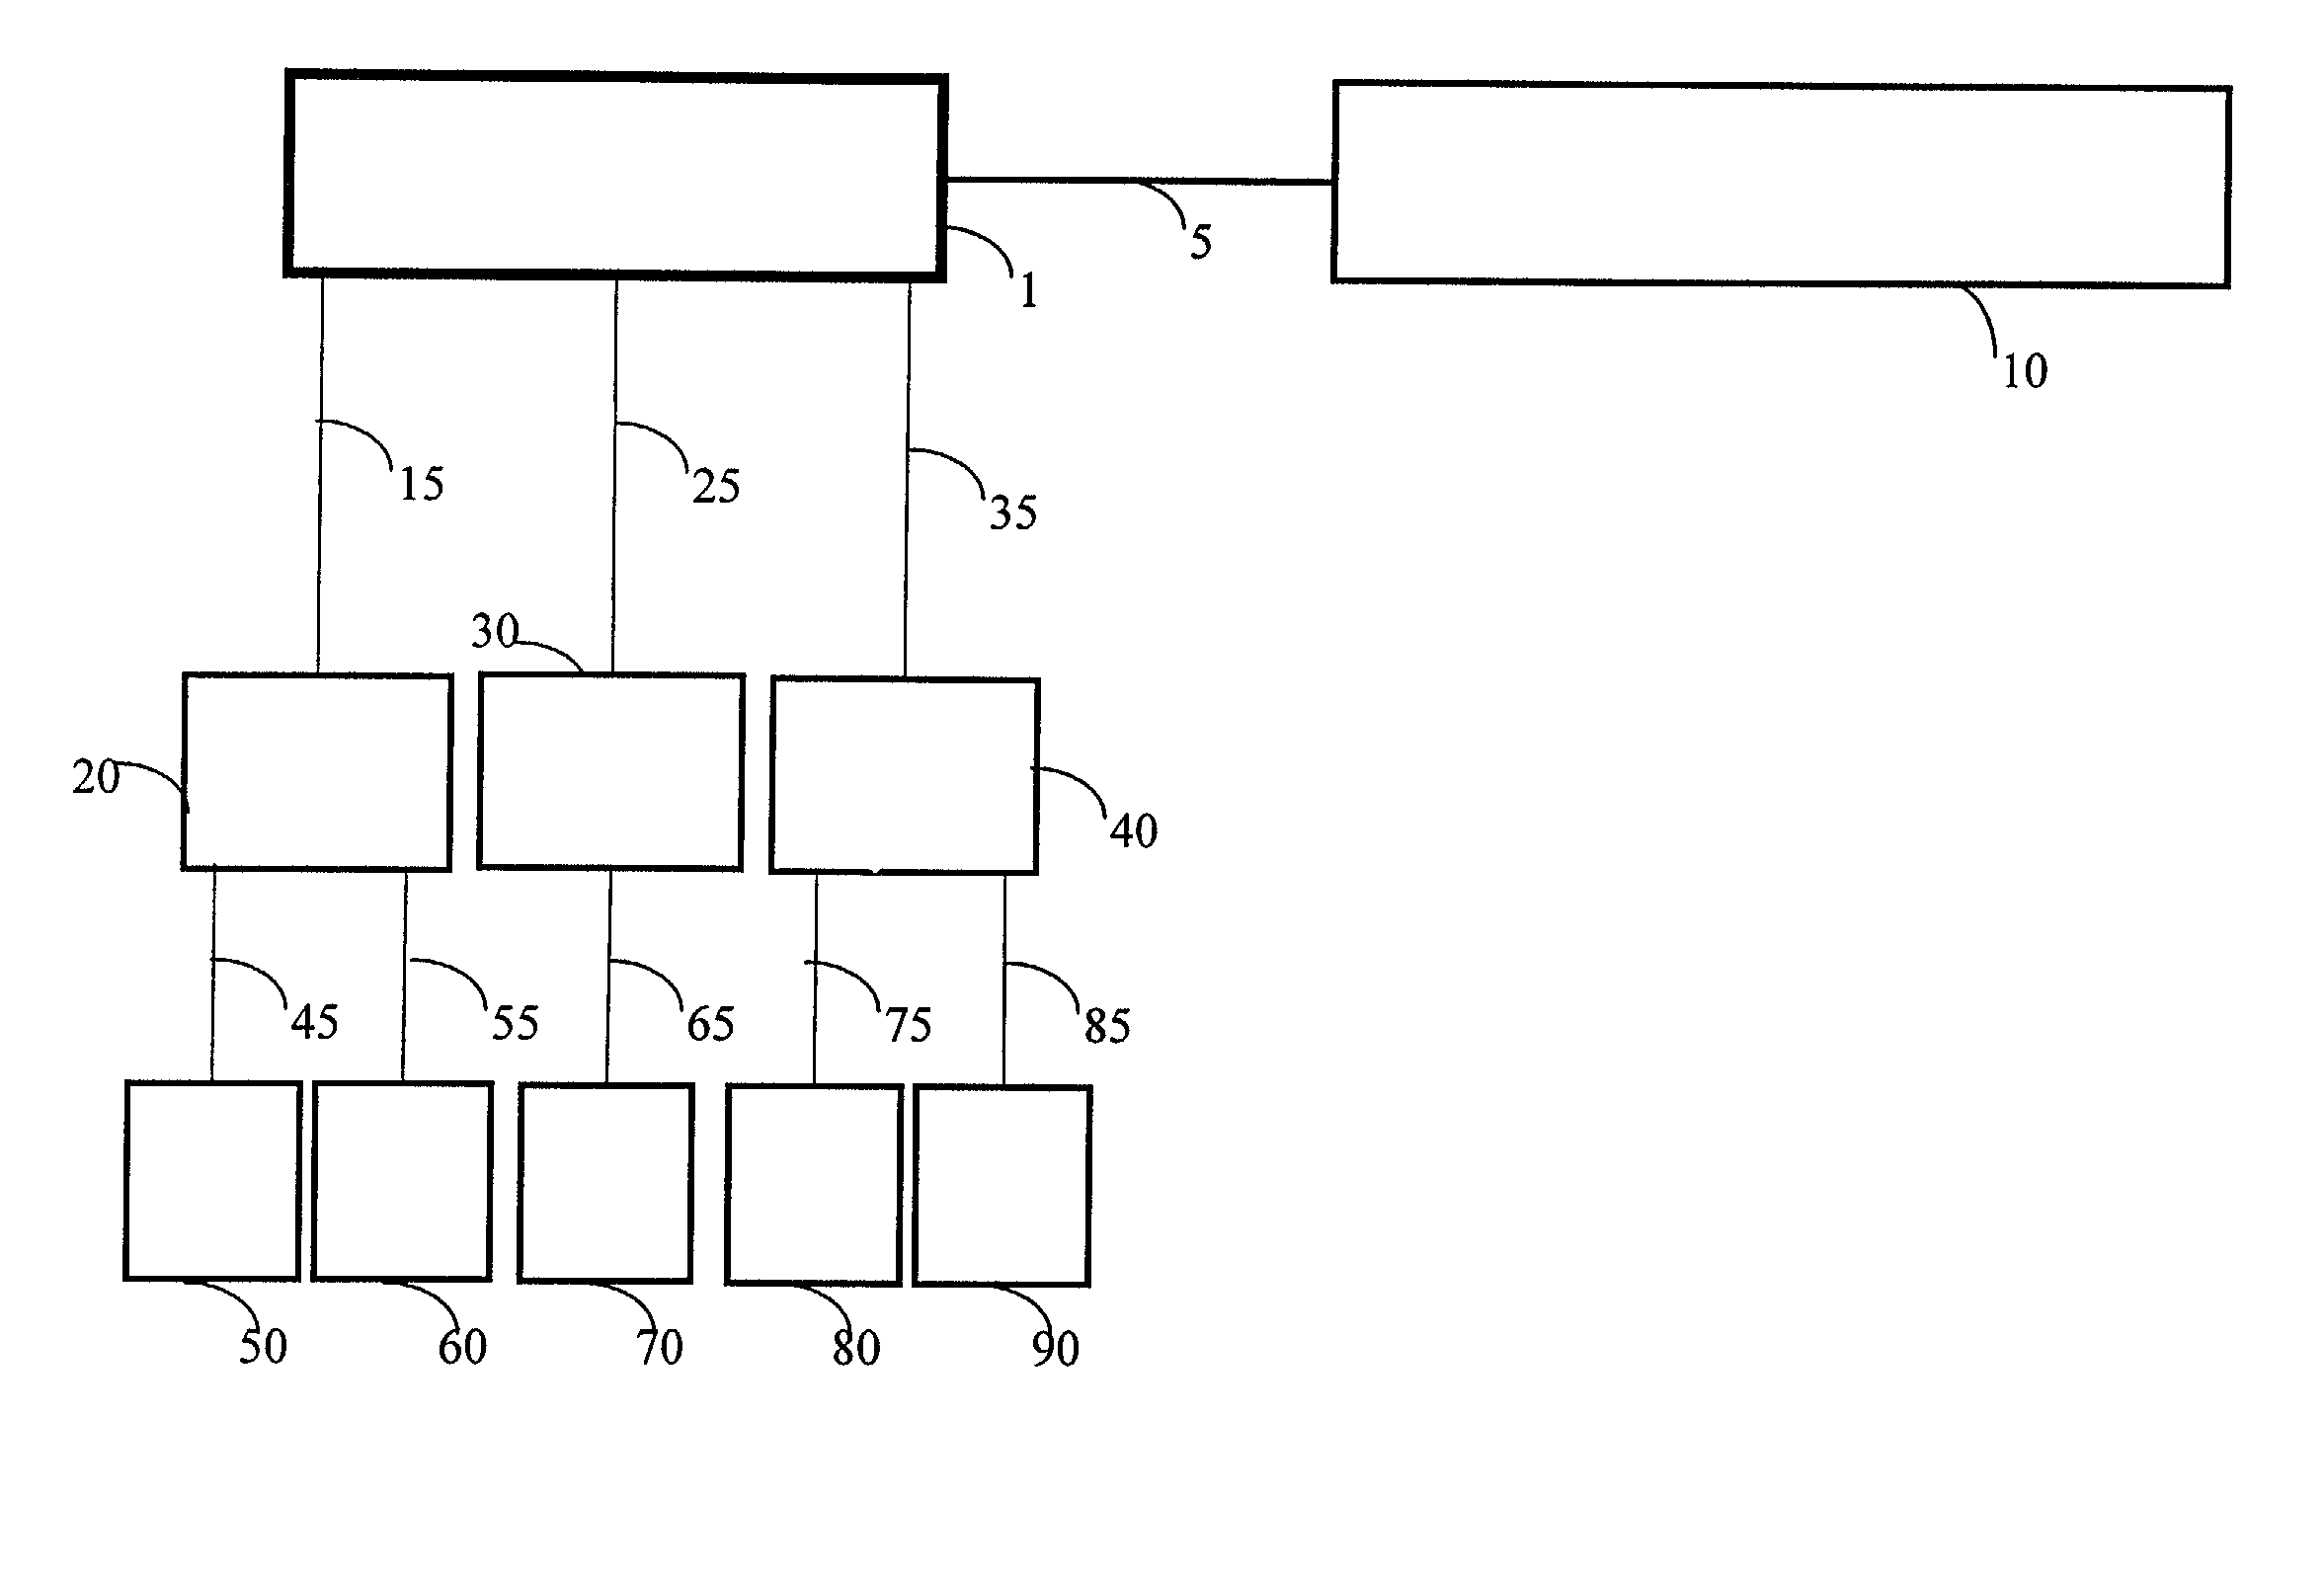 System, method and software for creating or maintaining distributed transparent persistence of complex data objects and their data relationships